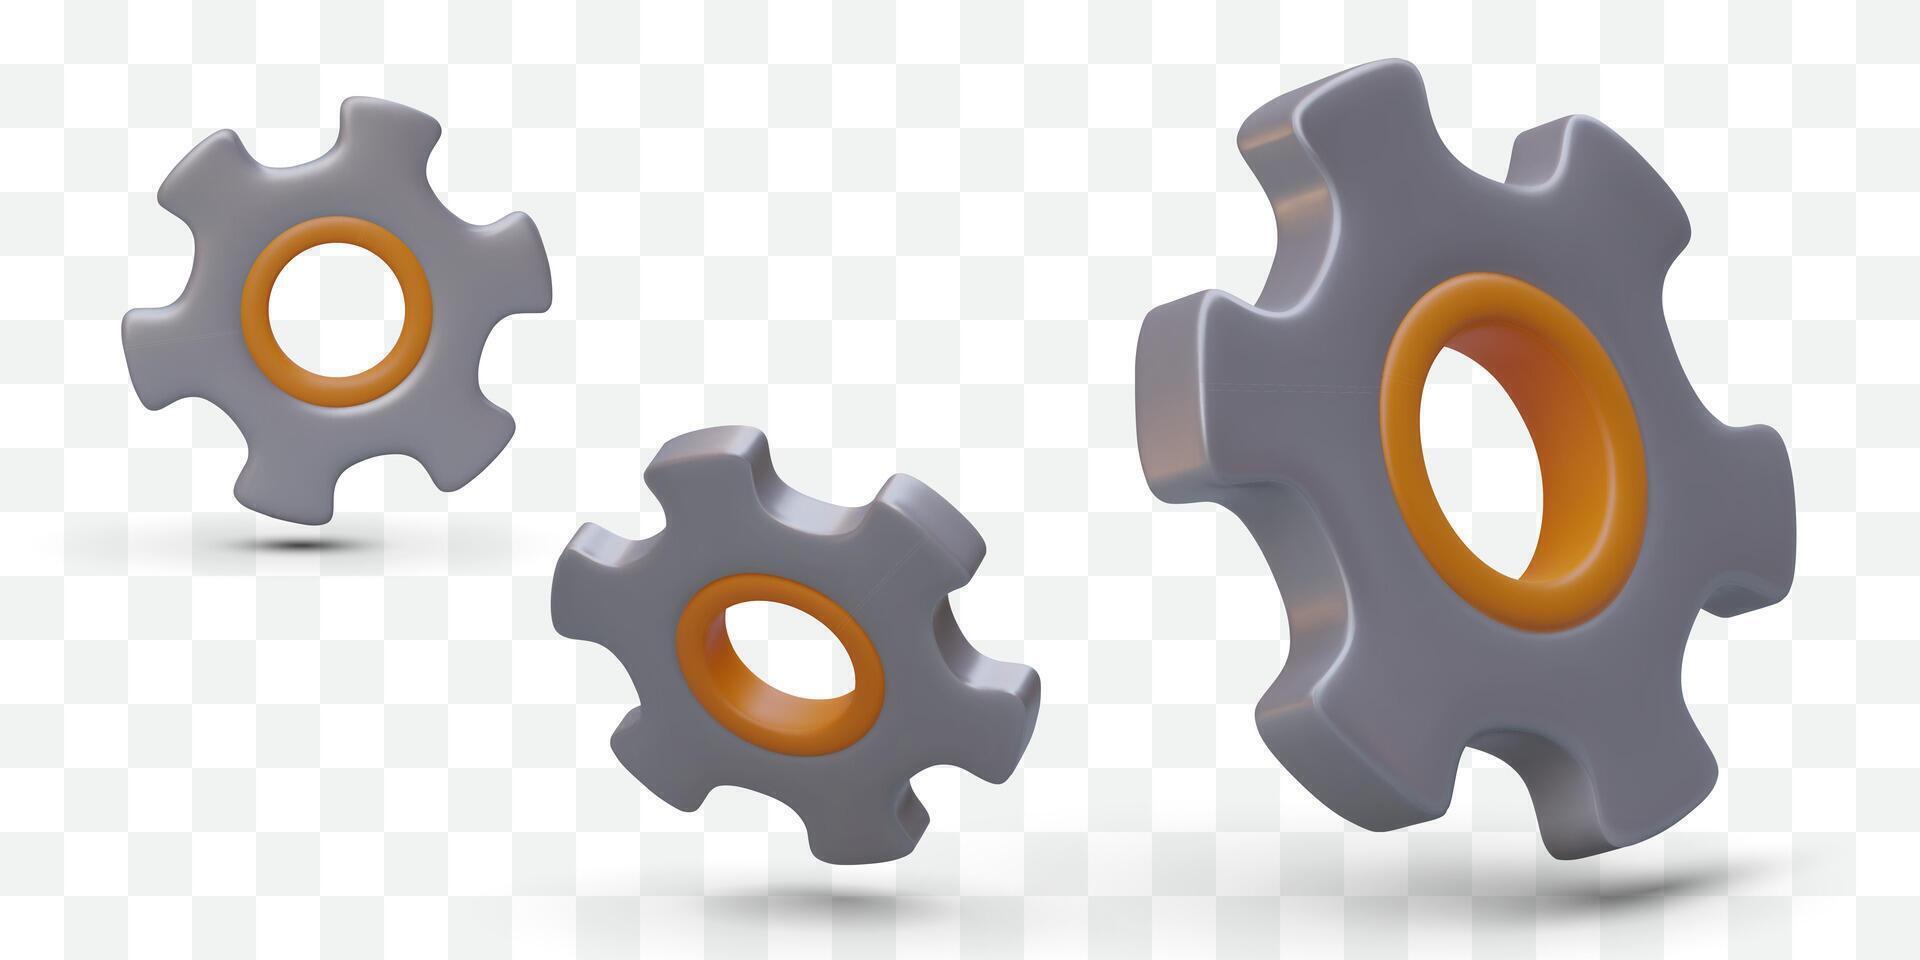 Set of 3D gears with shadows. Isolated vector images of tools